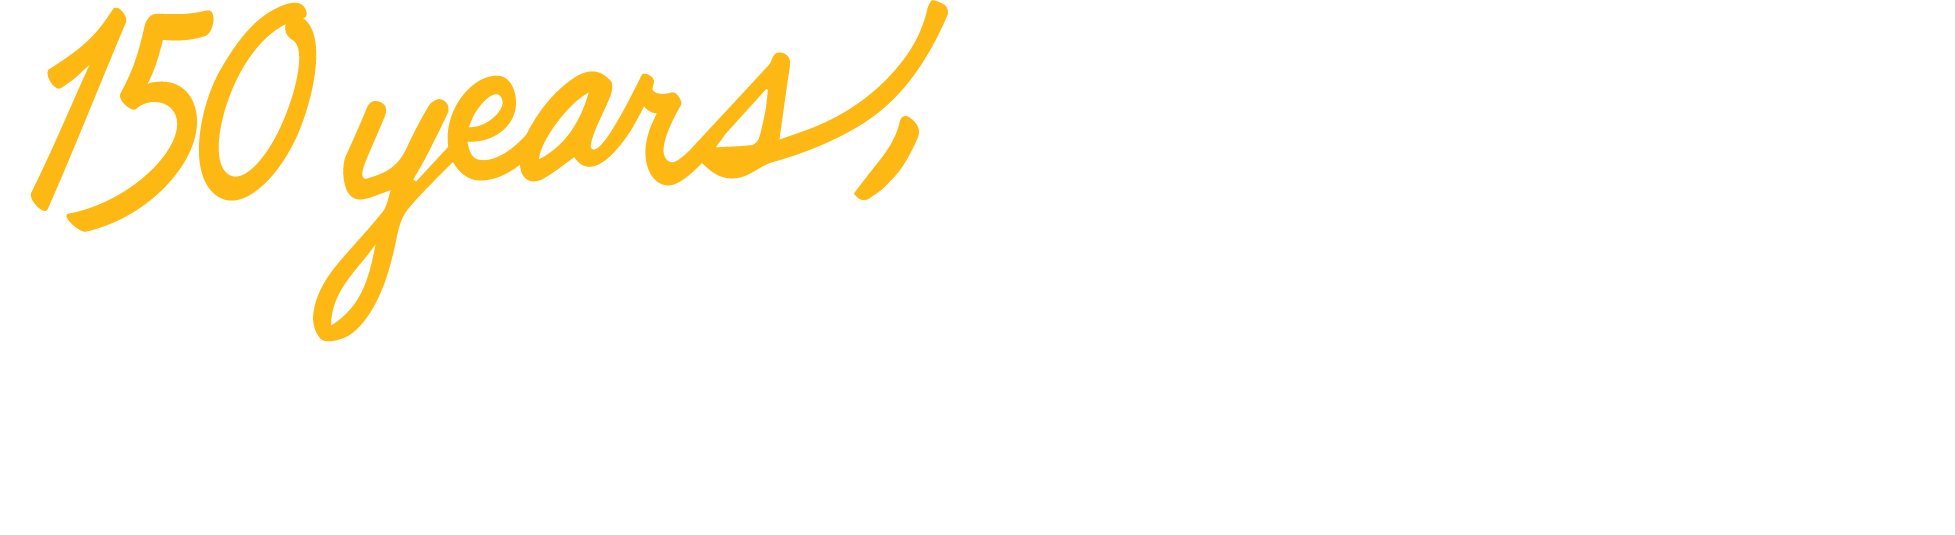 Yellow text that reads, '150 years,' followed by white text that reads, 'Florence Bank'